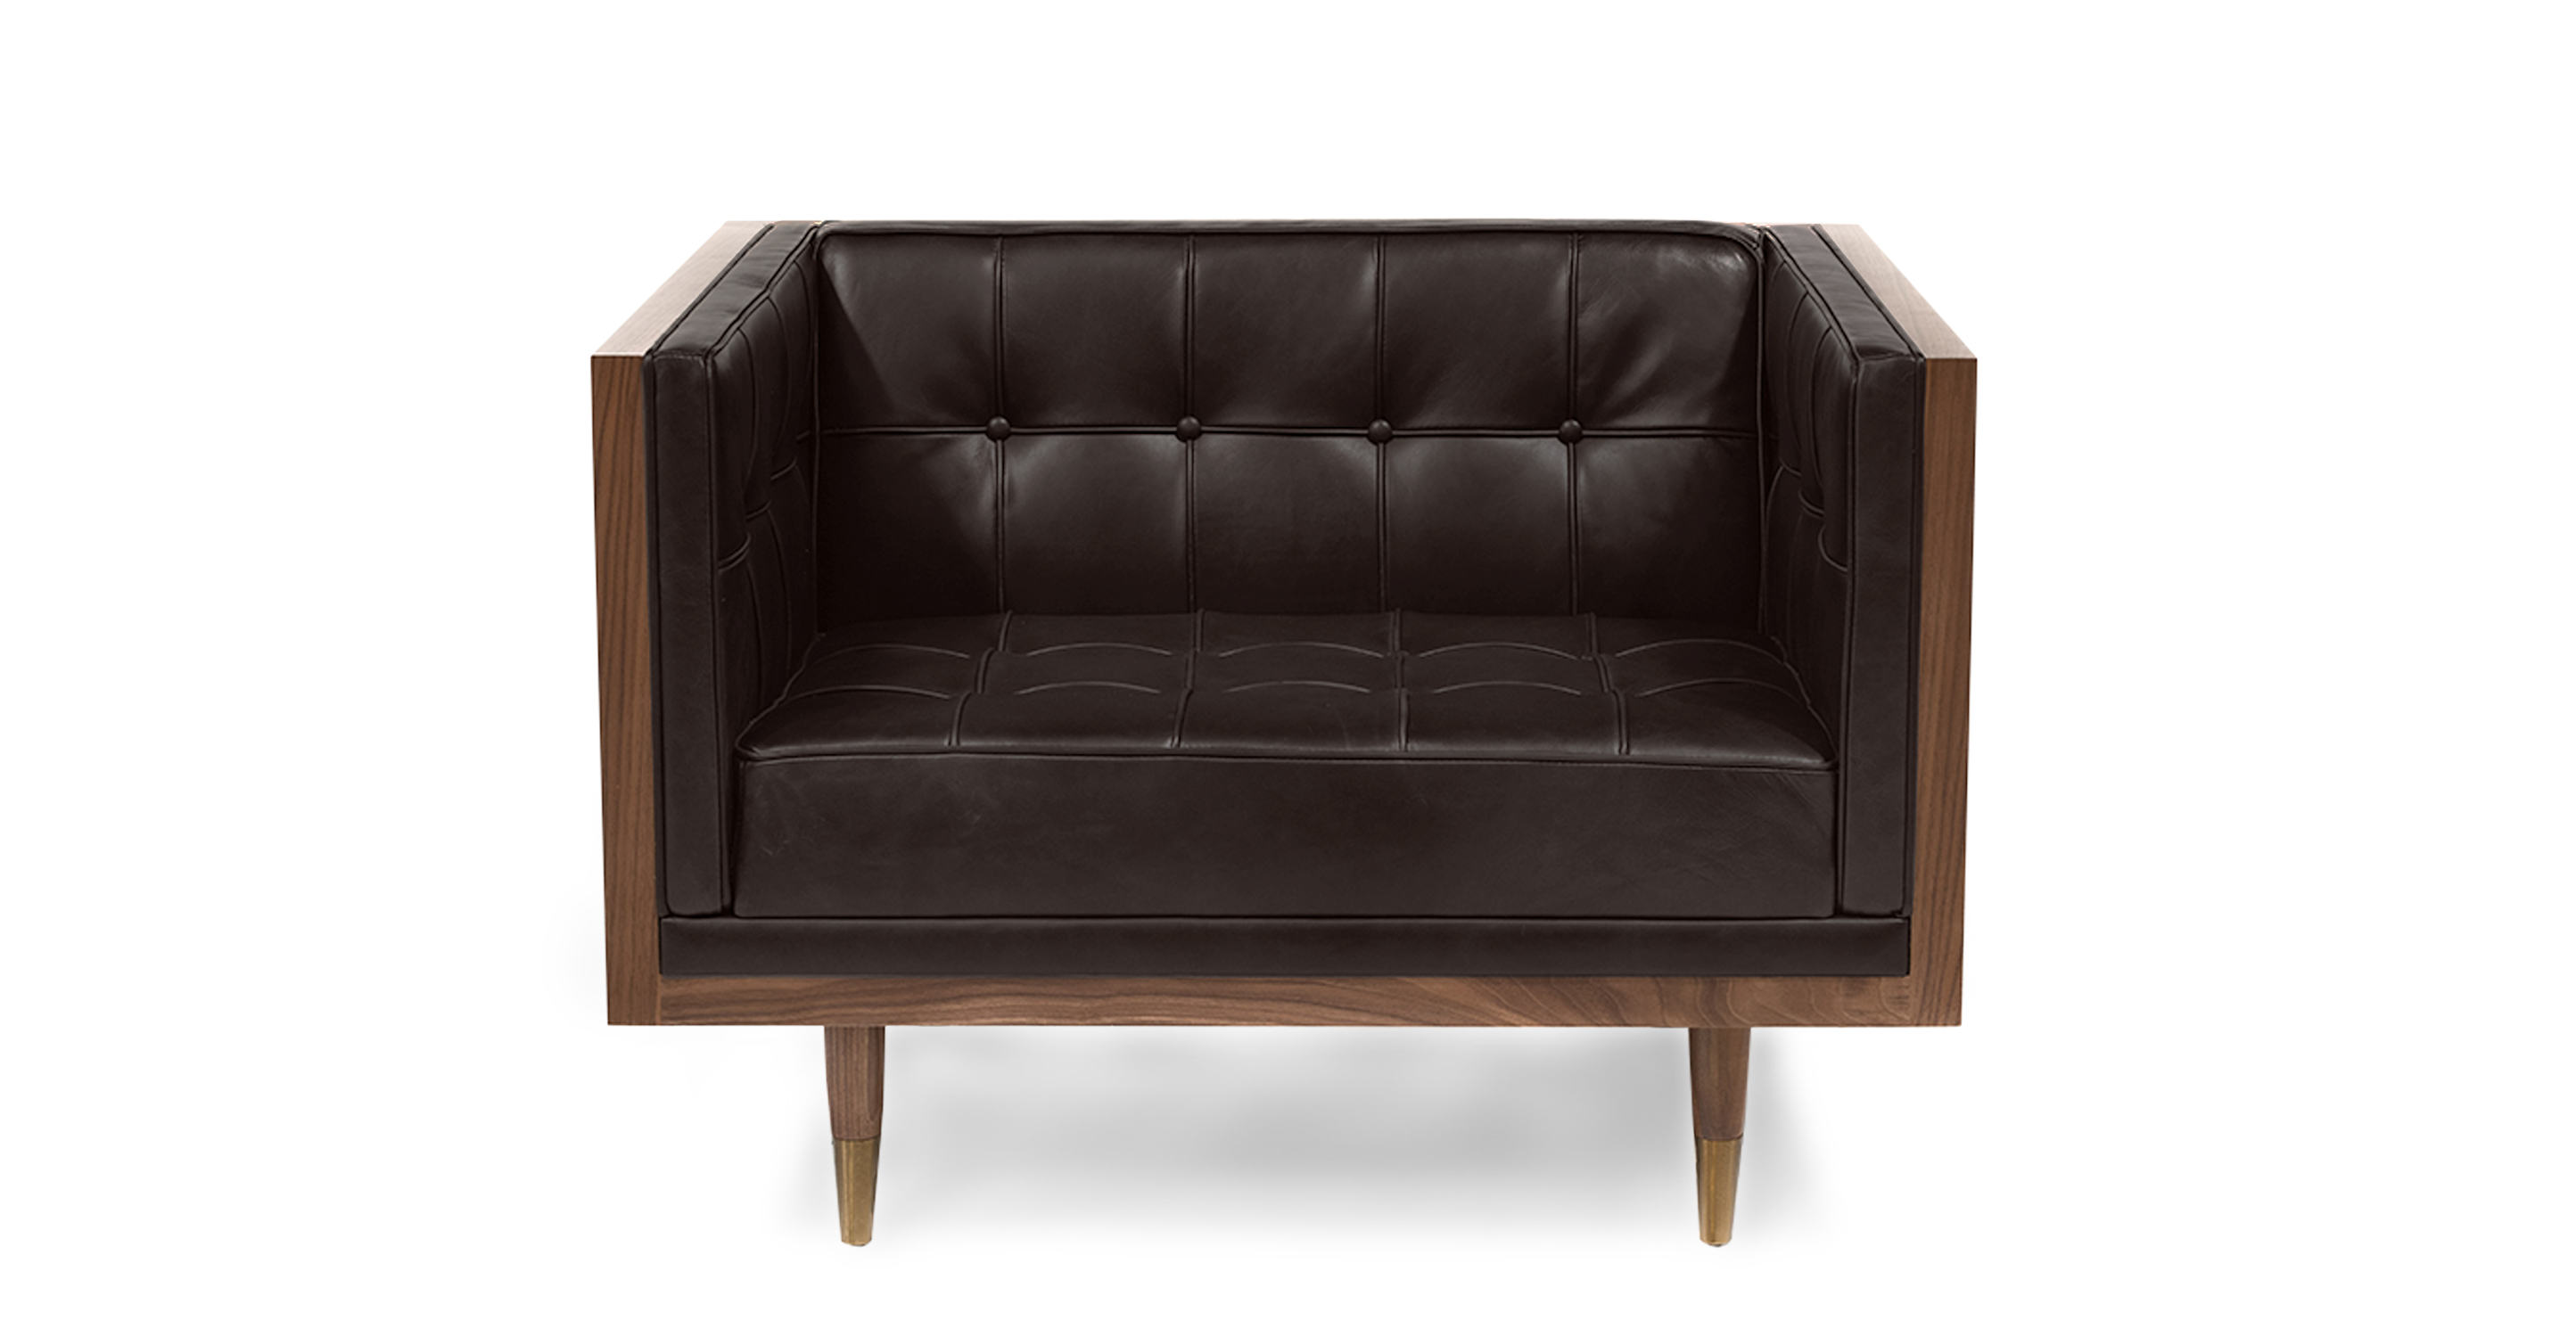 Image shows front picture of Kardiel's Mid-Century Modern Woodrow Box walnut wood wrapped chair in Saddle Black Leather. The boxy shaped chair has button tufted back, seat and side cushions. The chair's legs are brass tipped walnut wood. 